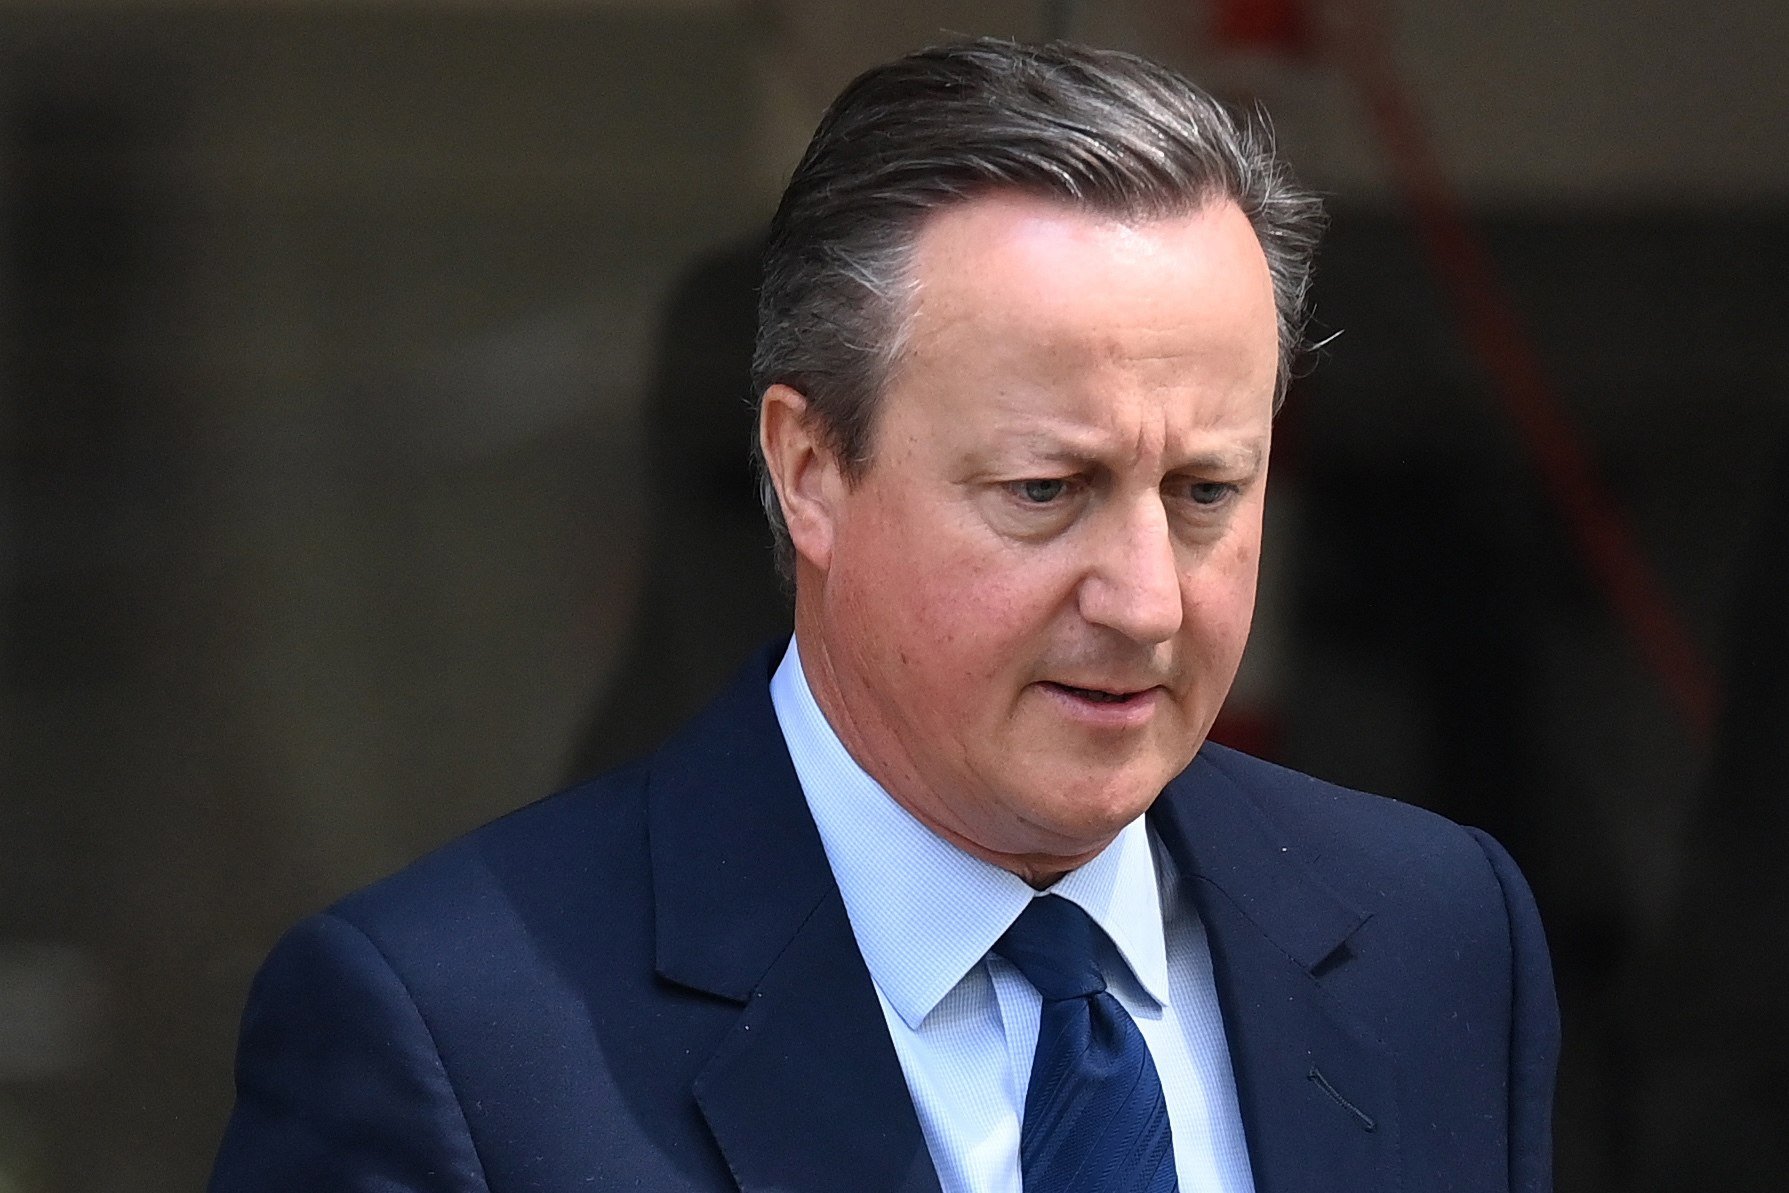 Former British Prime Minister David Cameron departs the Covid-19 Inquiry hearing in London. Photo: EPA-EFE